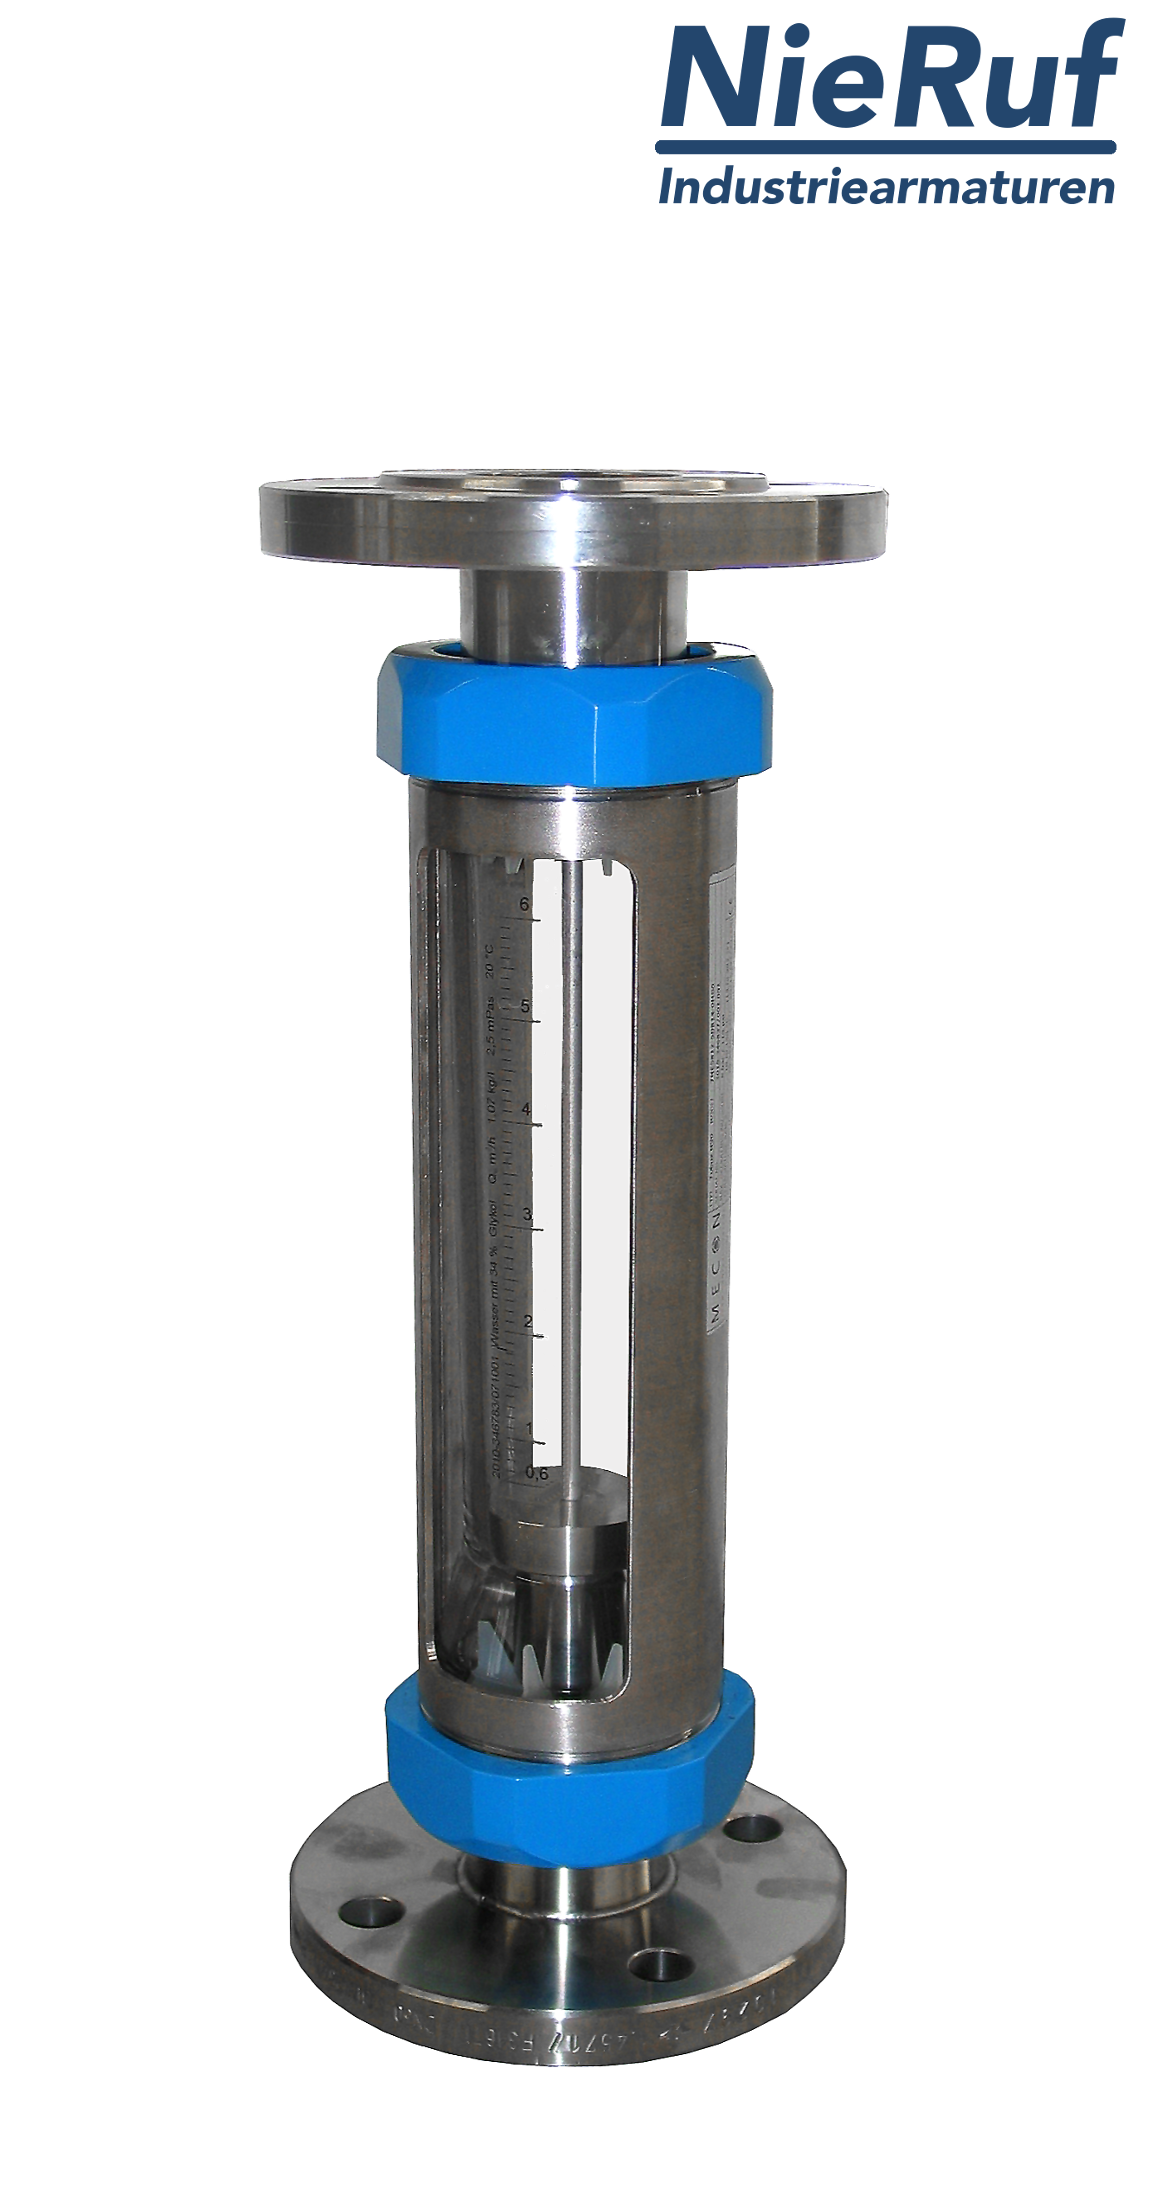 Variable area flowmeter stainless steel + borosilicate flange DN32 300.0 - 3000 l/h water FKM